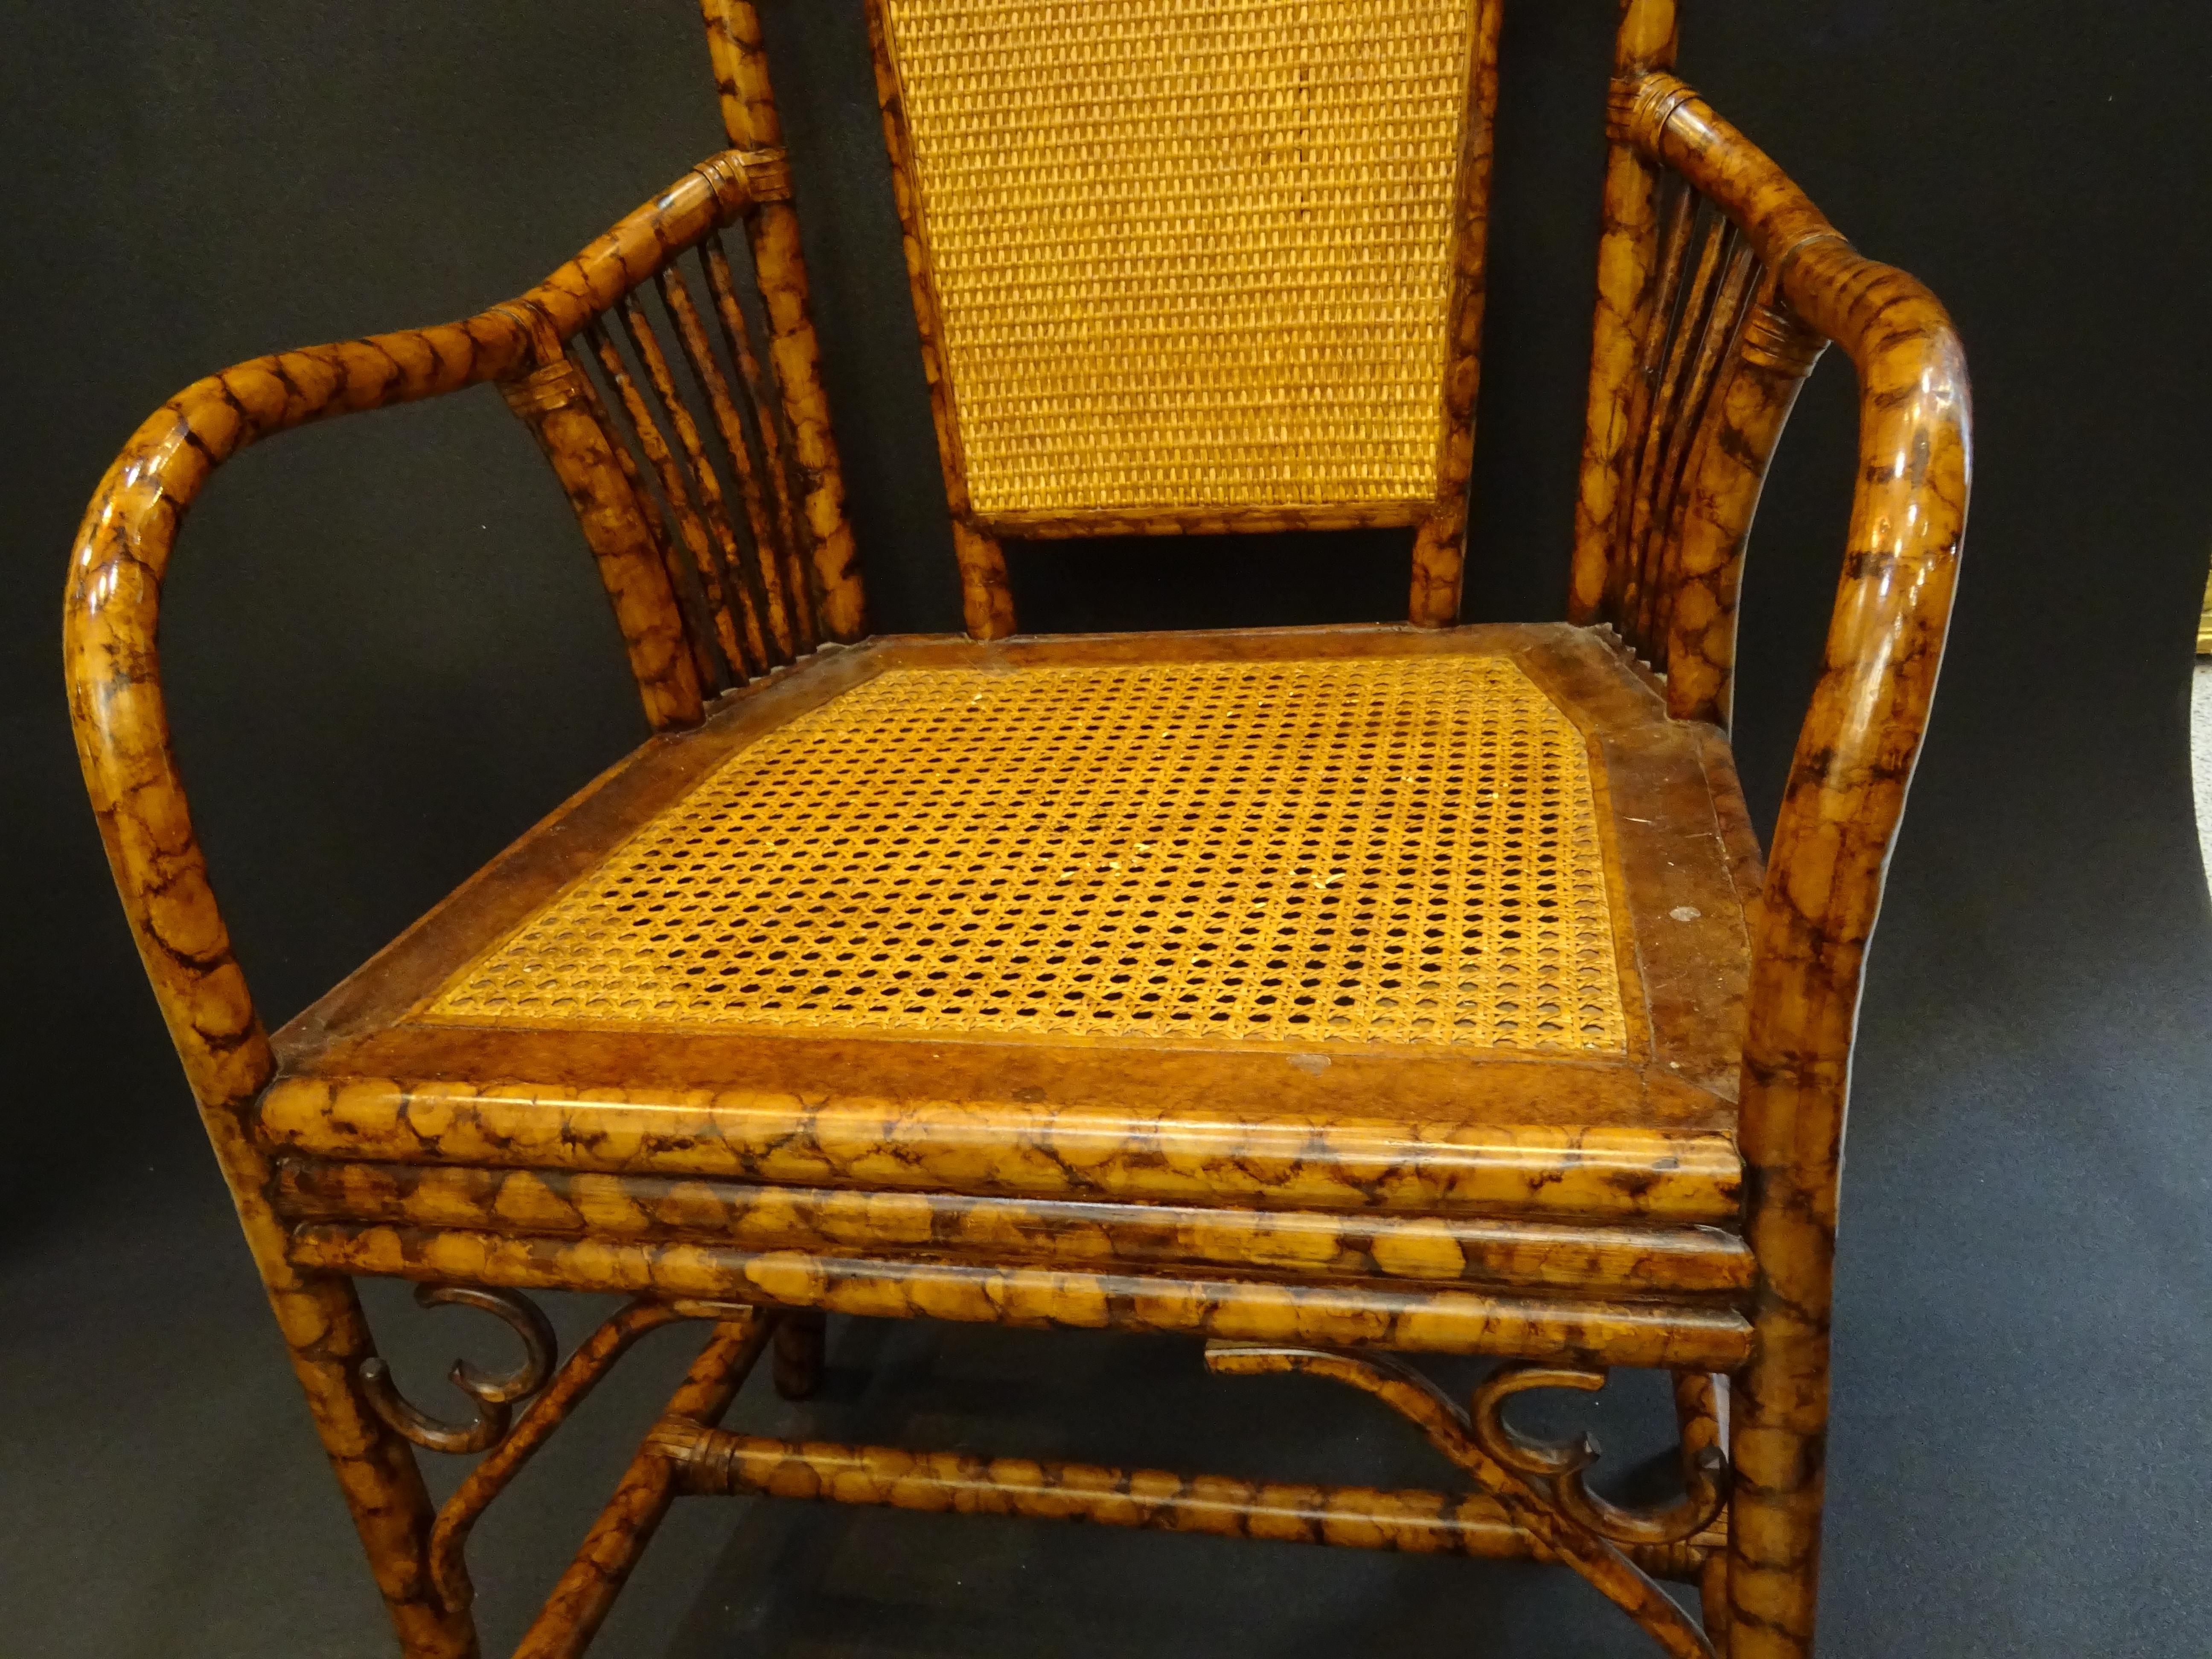 Early 20th Century English Arts & Crafts Bamboo Simulating Root Wood and Rattan Armchair, 1900